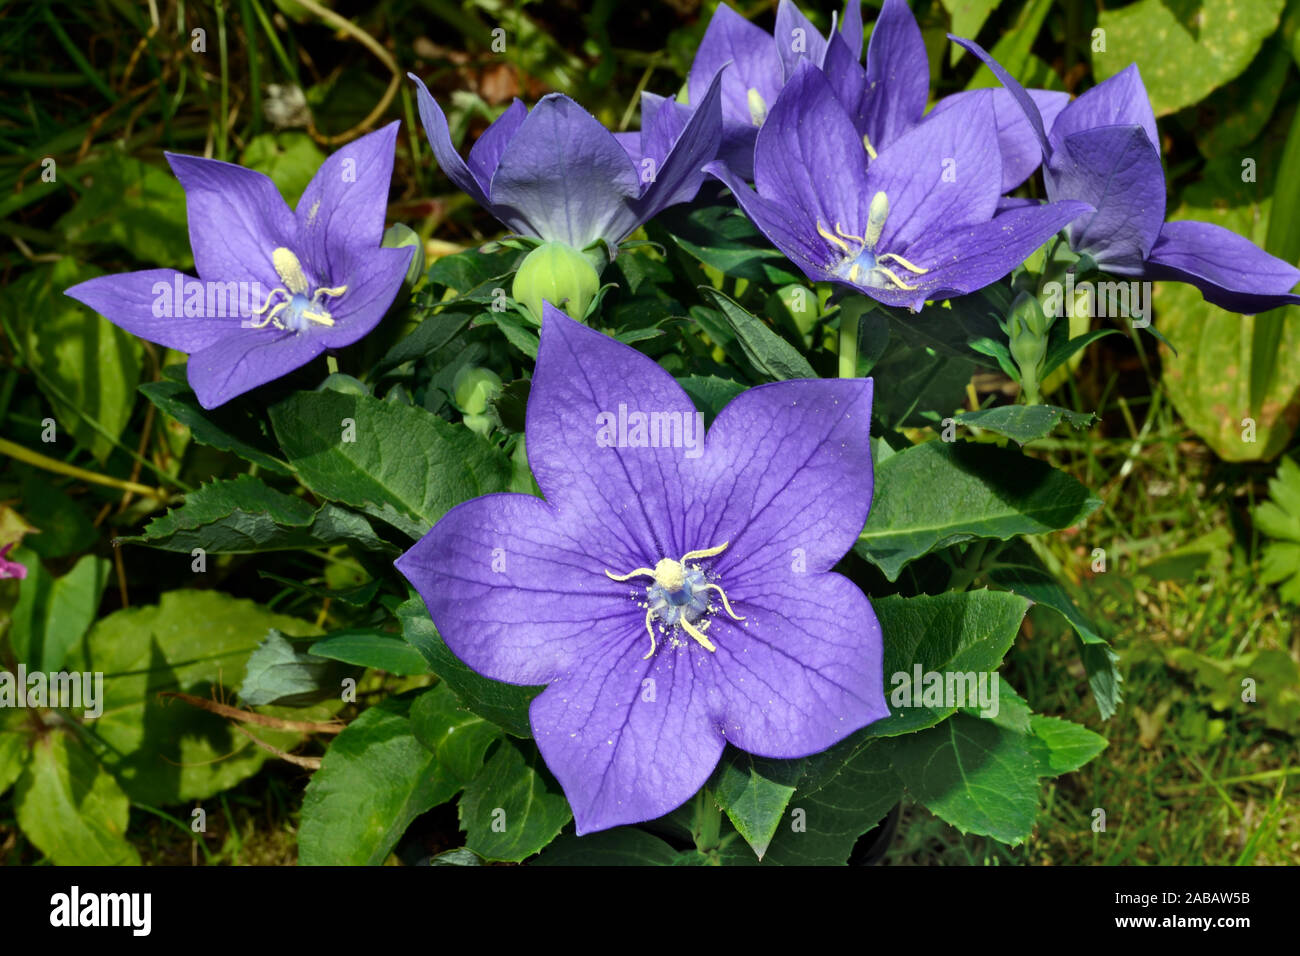 Platycodon grandiflorus (balloon flower) is native to East Asia where it grows on grassy slopes in hills and mountains. Stock Photo